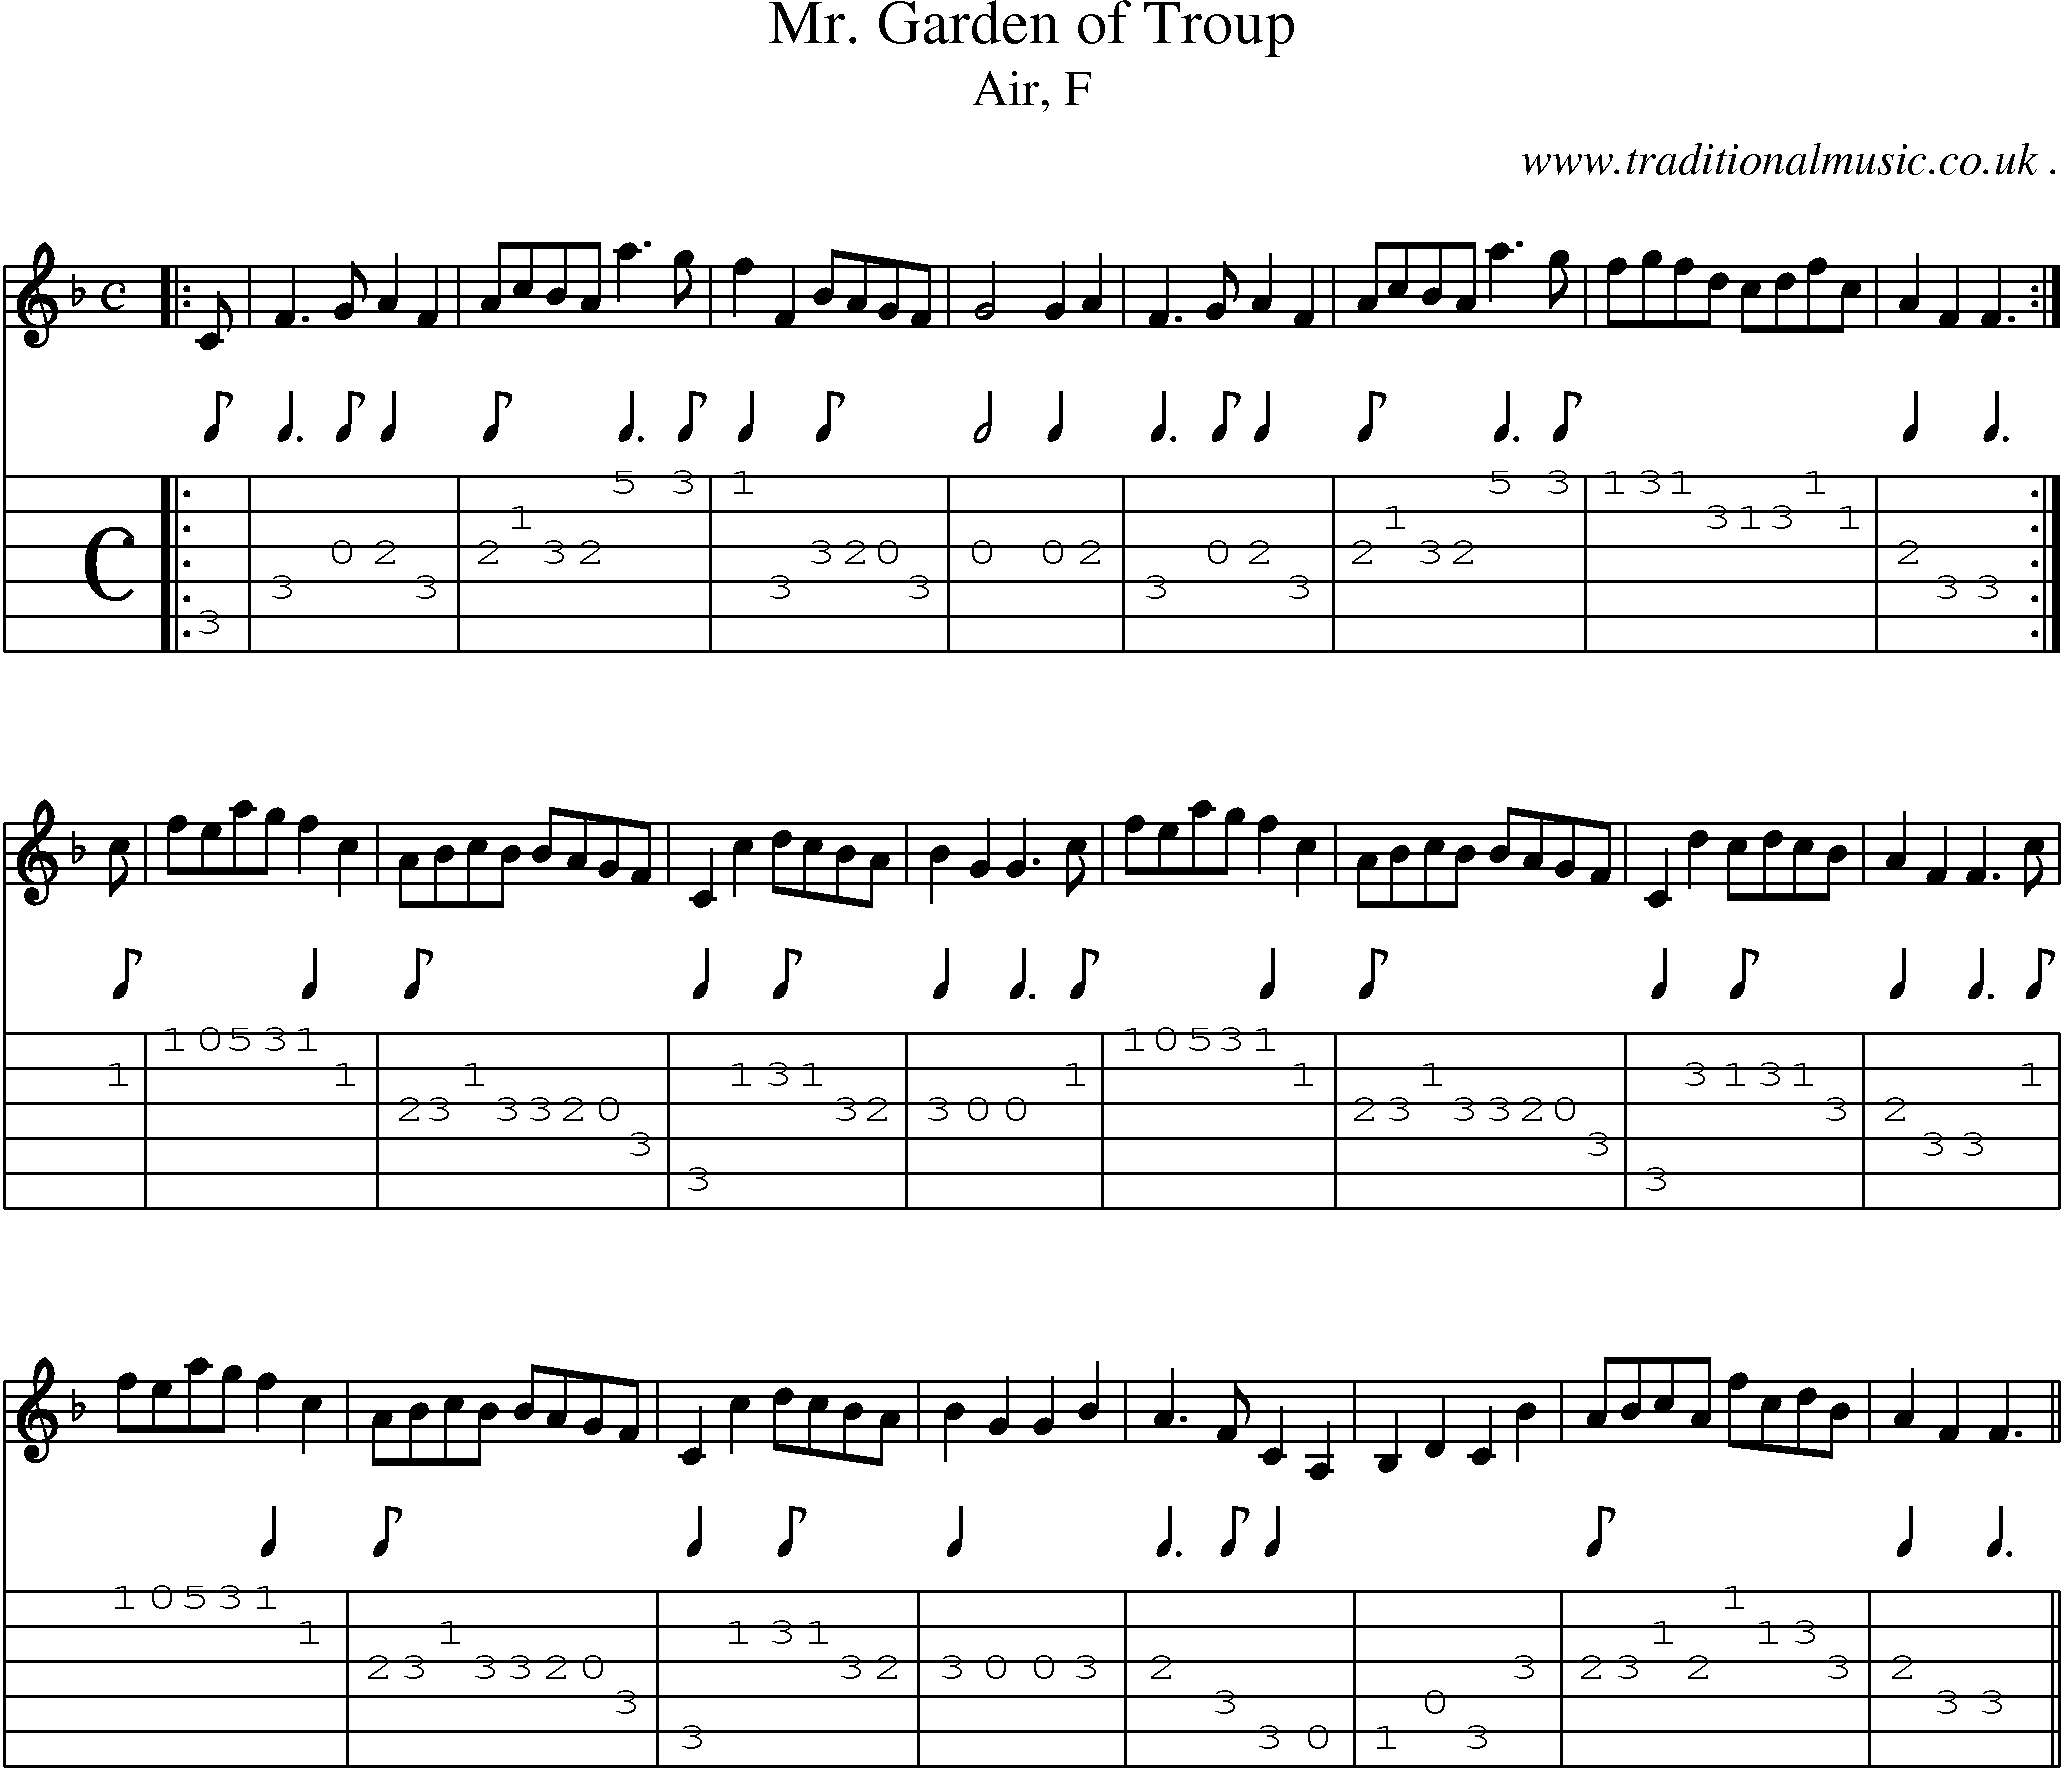 Sheet-music  score, Chords and Guitar Tabs for Mr Garden Of Troup